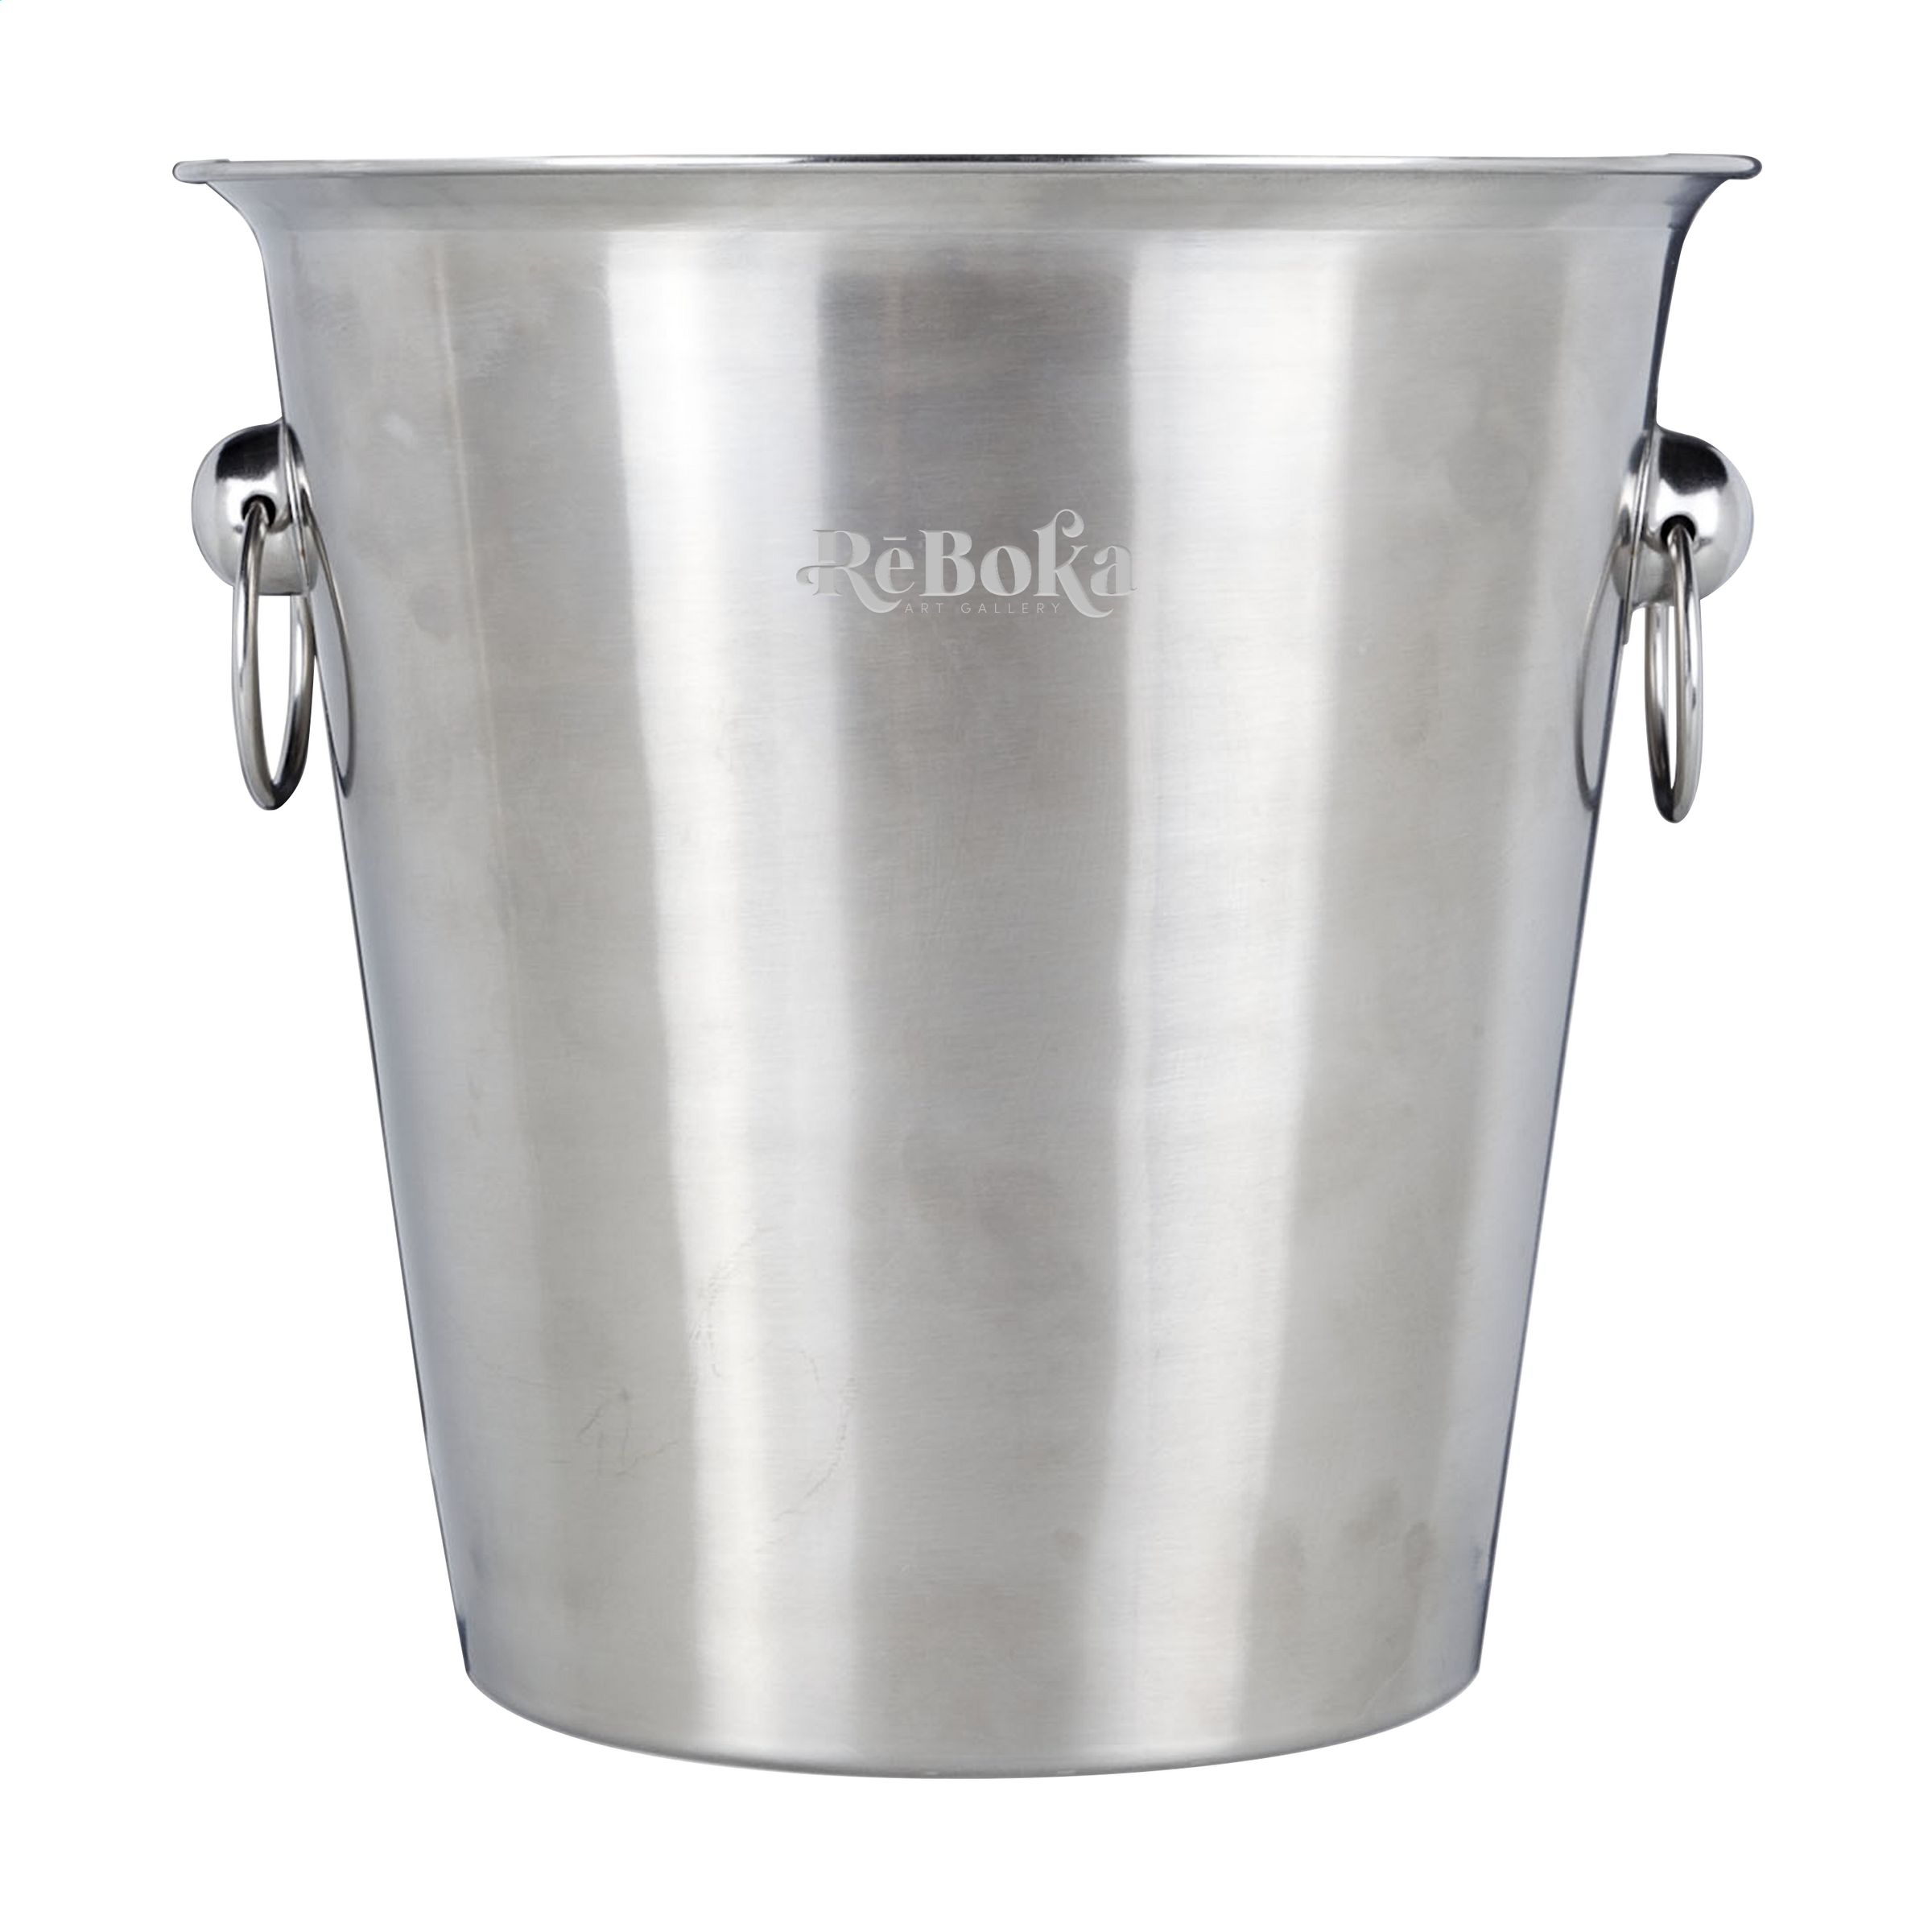 Stainless-Steel Champagne Cooler/Ice Bucket - Battersby